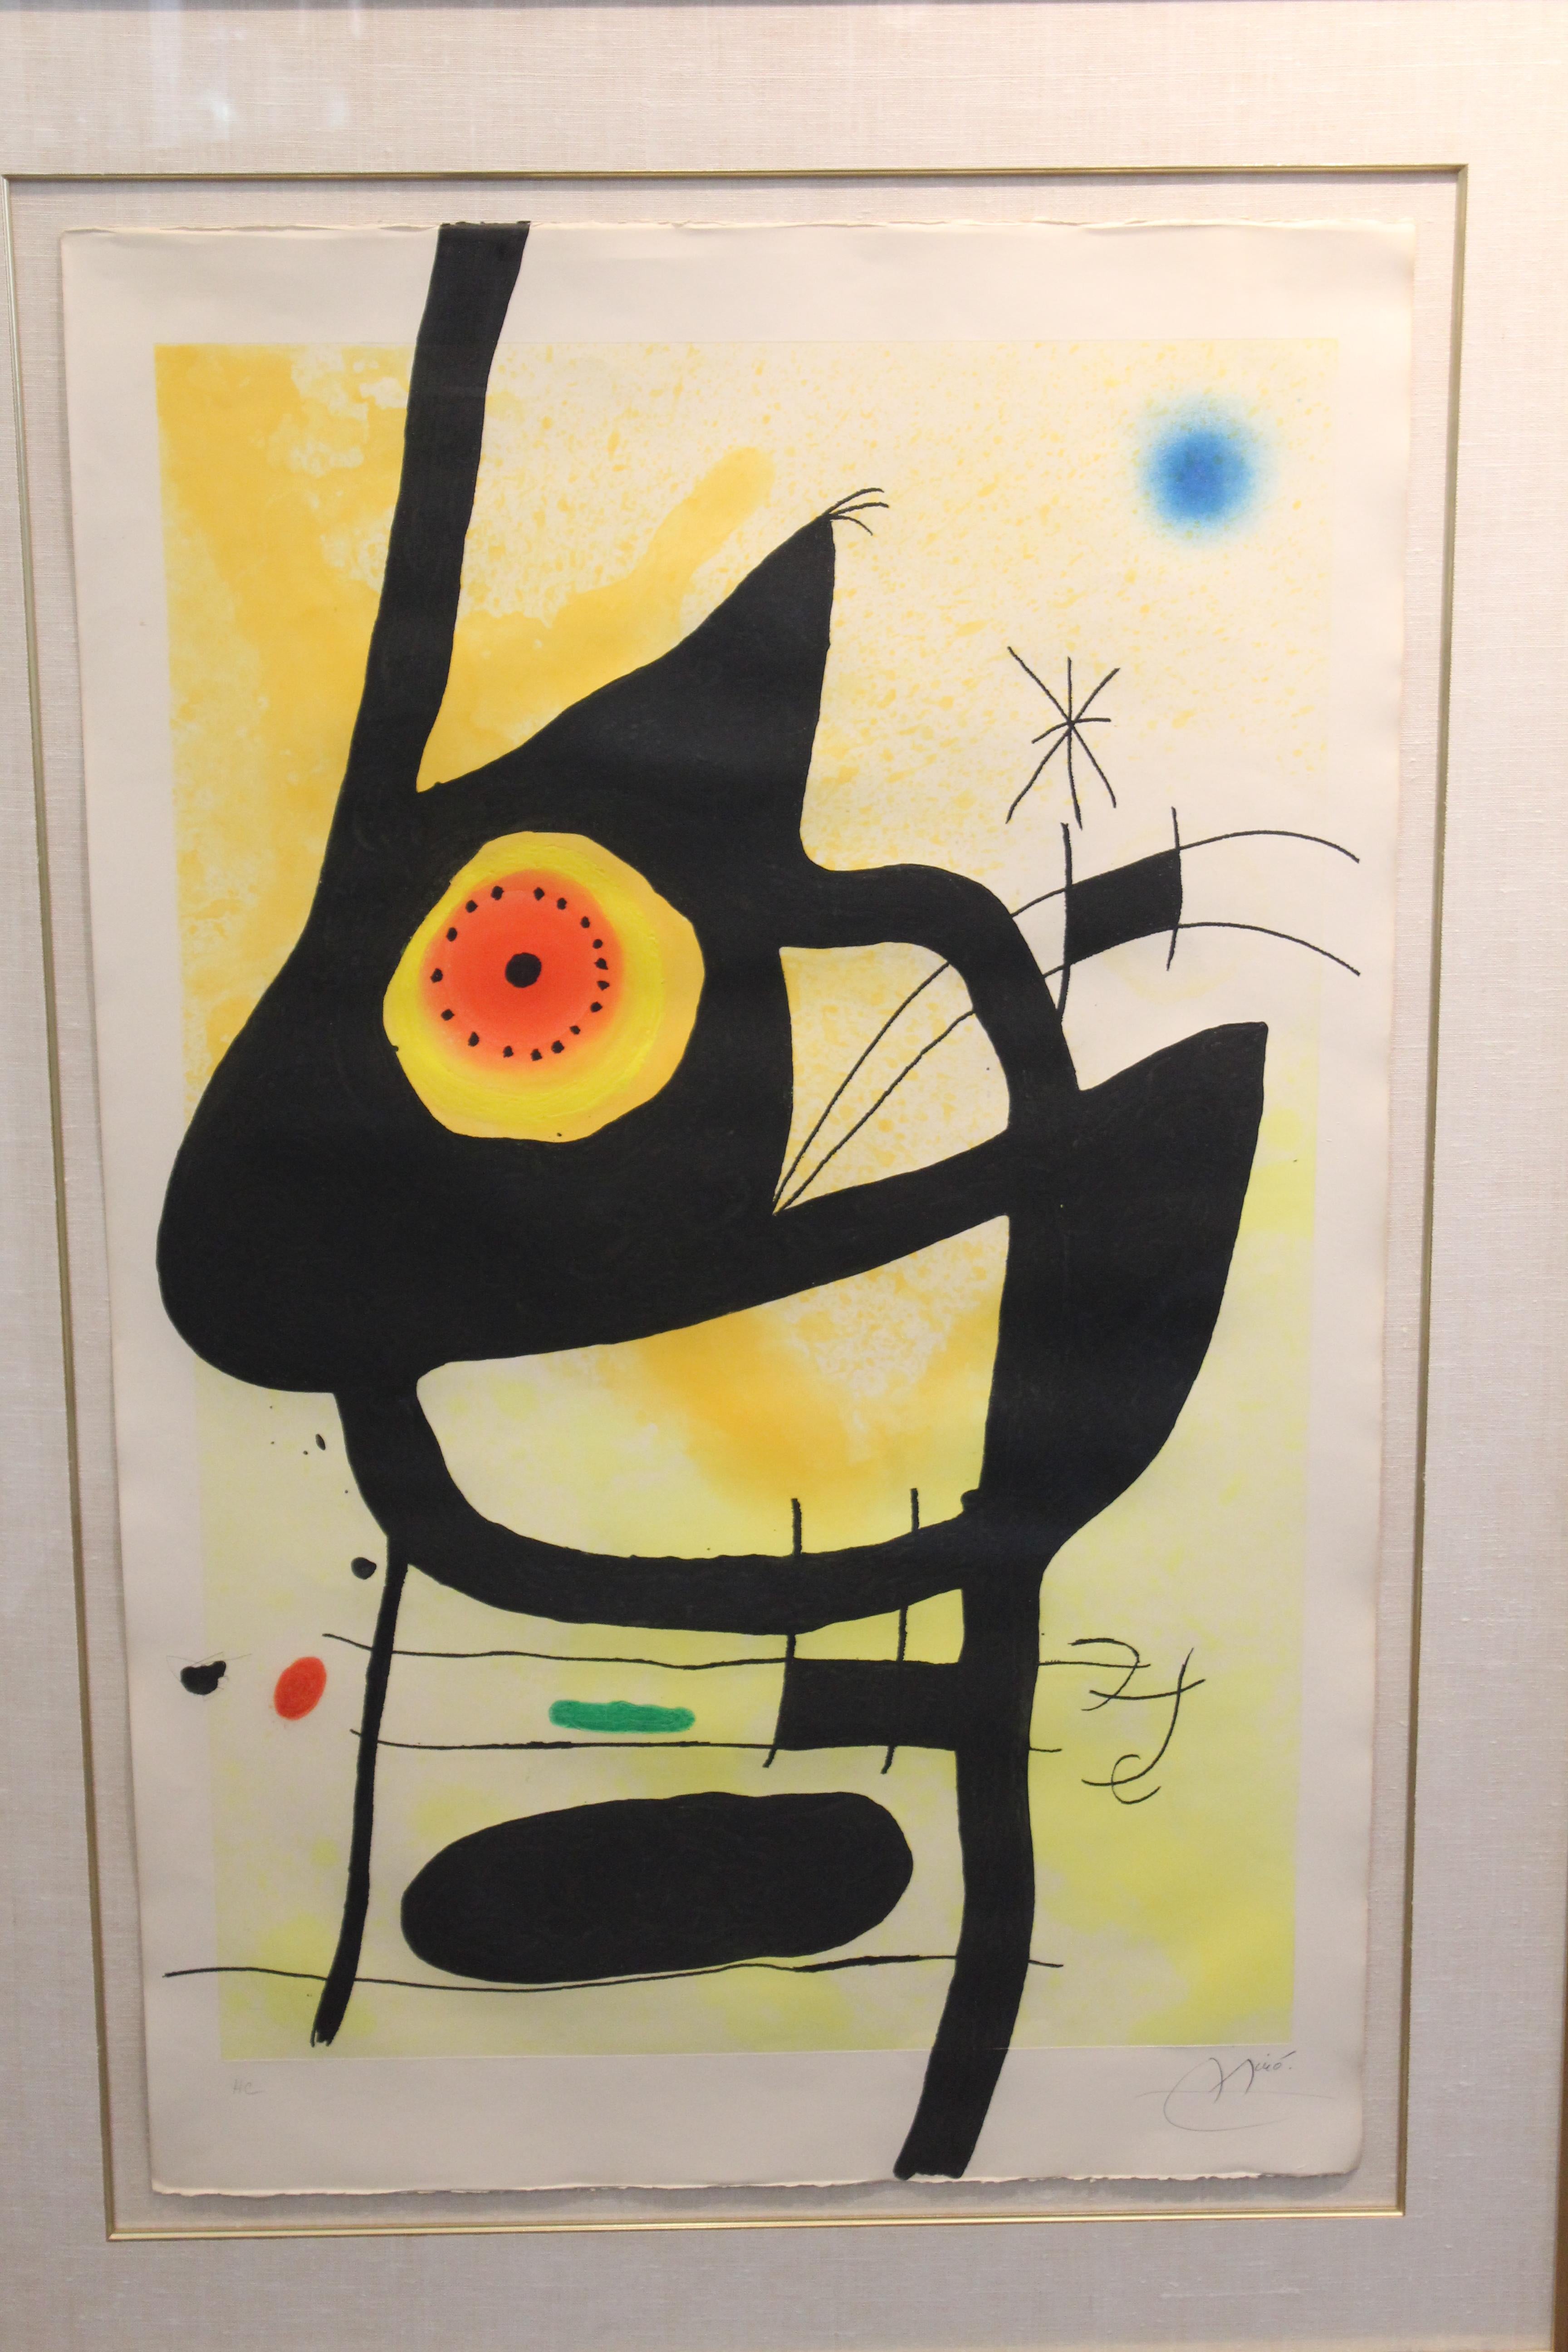 Joan Miro signed and framed print titled 'La Femme Des Sables'. The piece dates from 1969 and is signed 'Miro' in the lower right corner and marked 'HC' in the lower left corner outside the edition of 75. Etching and aquatint process and